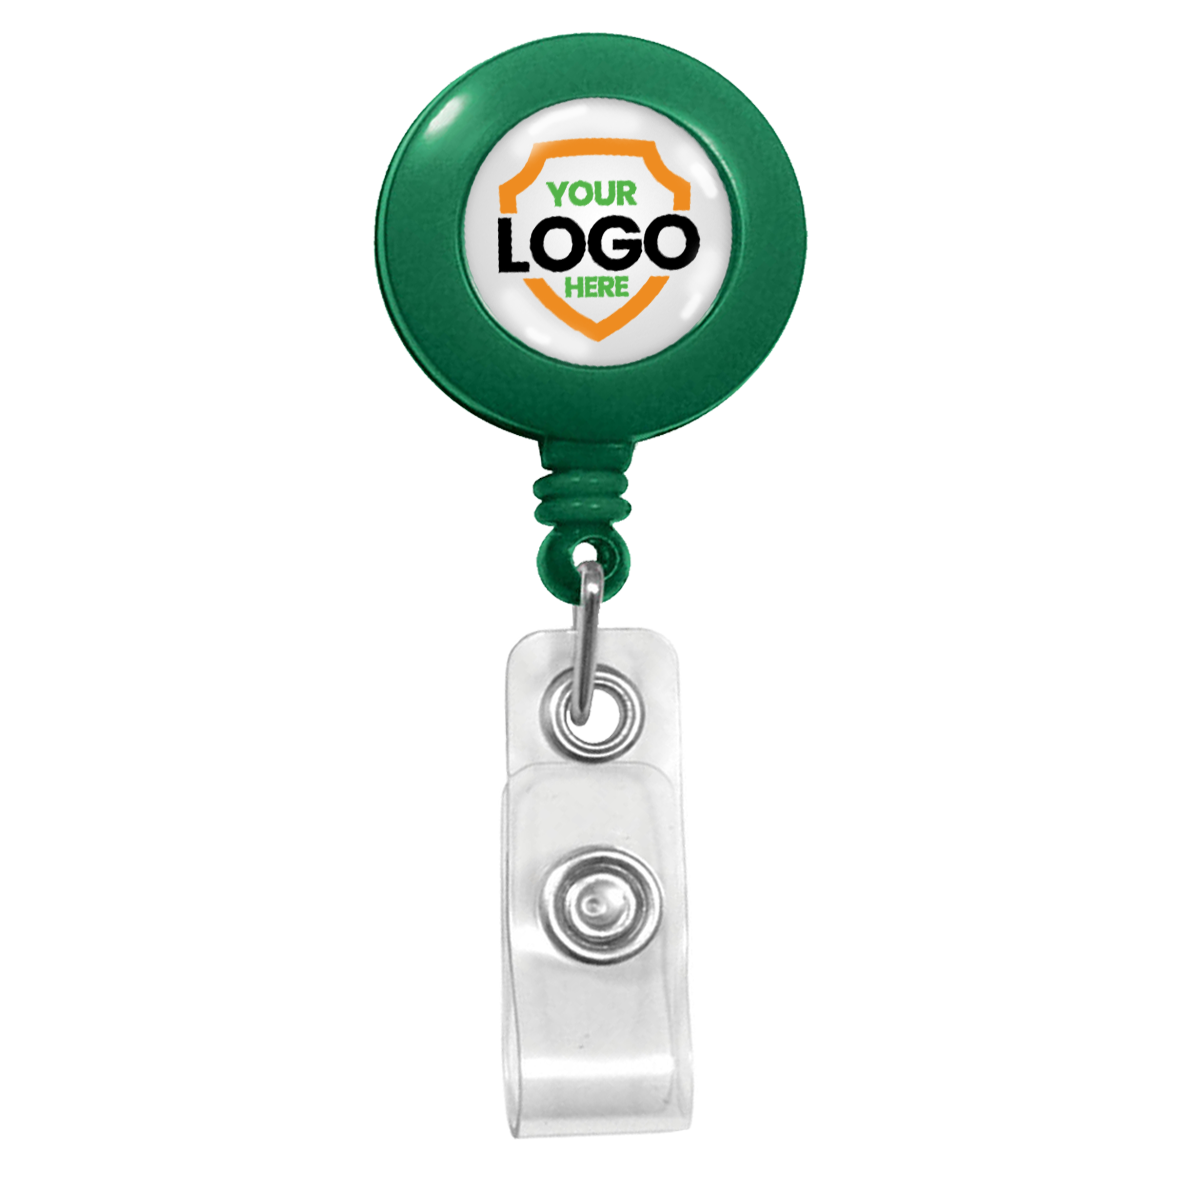 Green Custom Printed Retractable Badge Reels With Belt Clip - Personalize with Your Brand Logo with a white and orange circle in the center labeled "YOUR LOGO HERE." It features a clear plastic clip for attaching a badge. Ideal for custom badge reels, it helps promote brand awareness with full color graphics that make your logo pop.